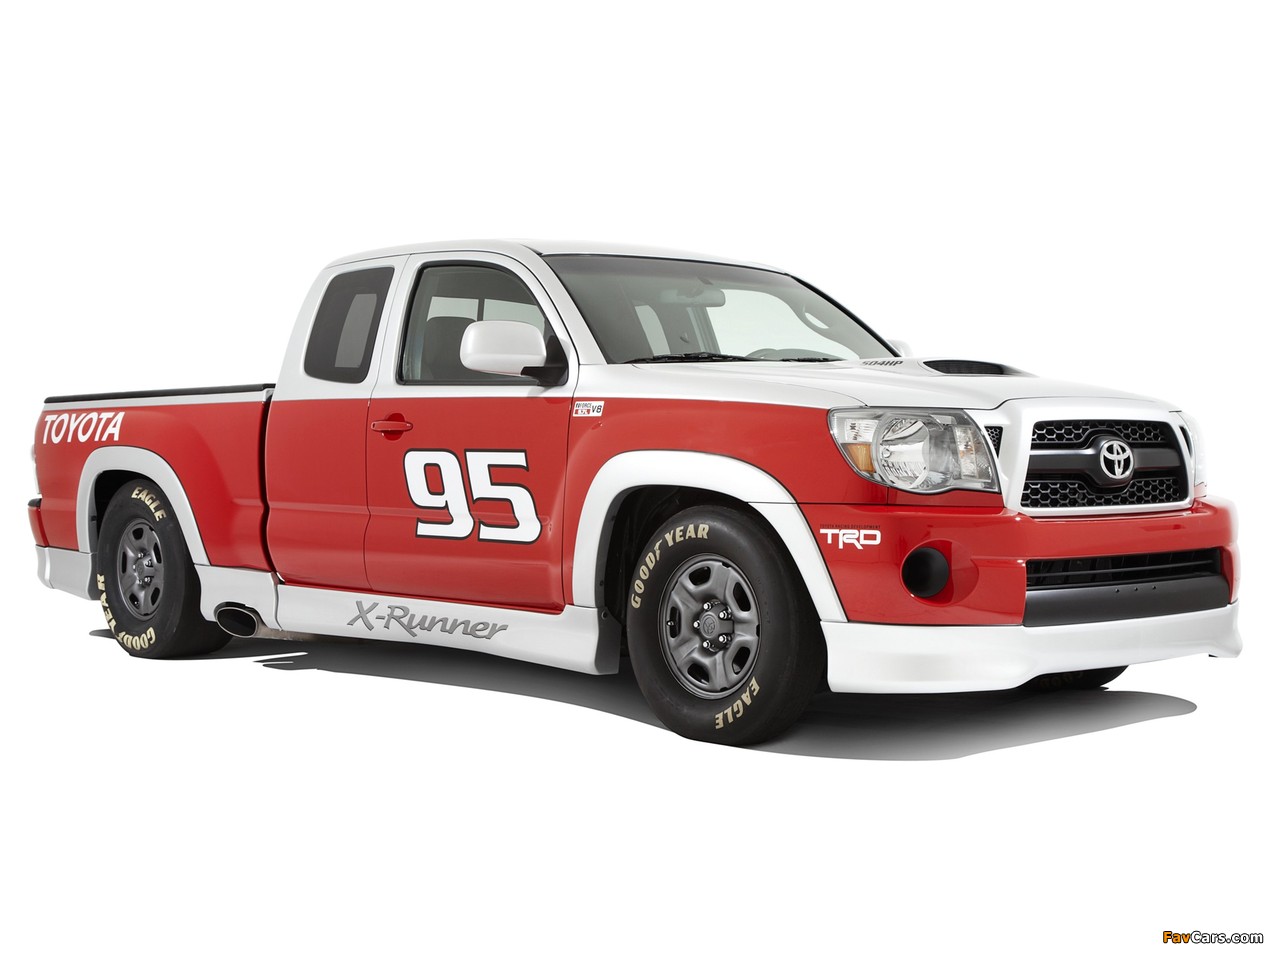 Toyota Tacoma X-Runner RTR Concept 2010 wallpapers (1280 x 960)